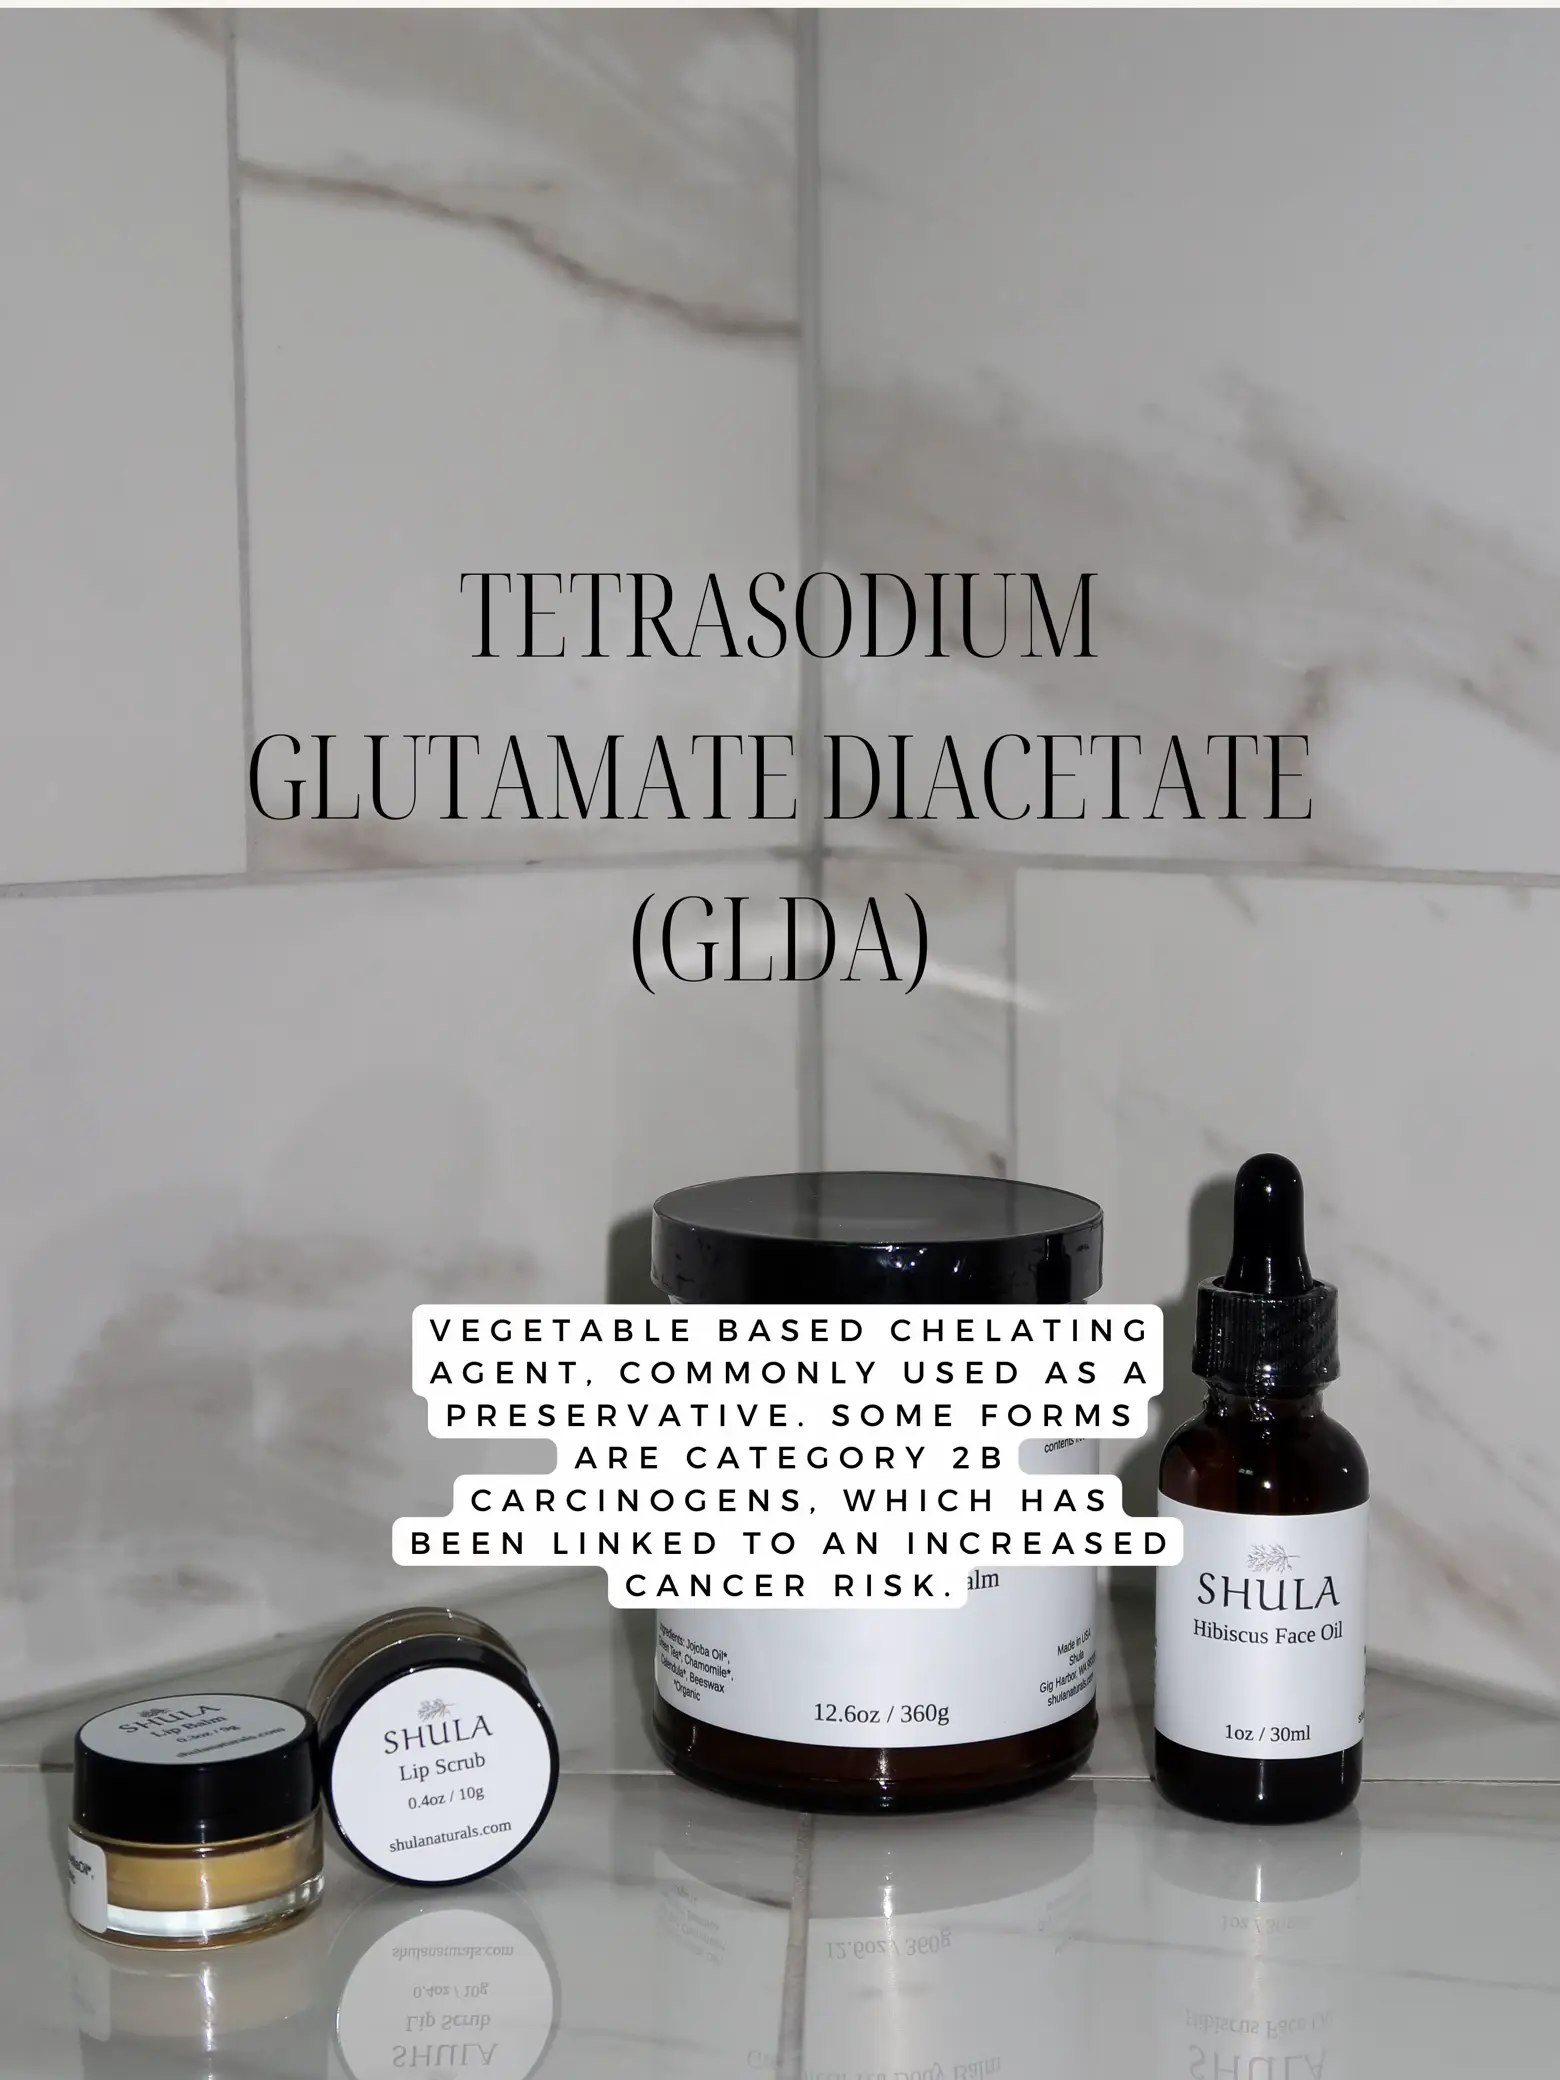  A bottle of Tetrasodium glutamate diacetate (GLDA) is displayed on a counter next to a bottle of Lip Scrub.